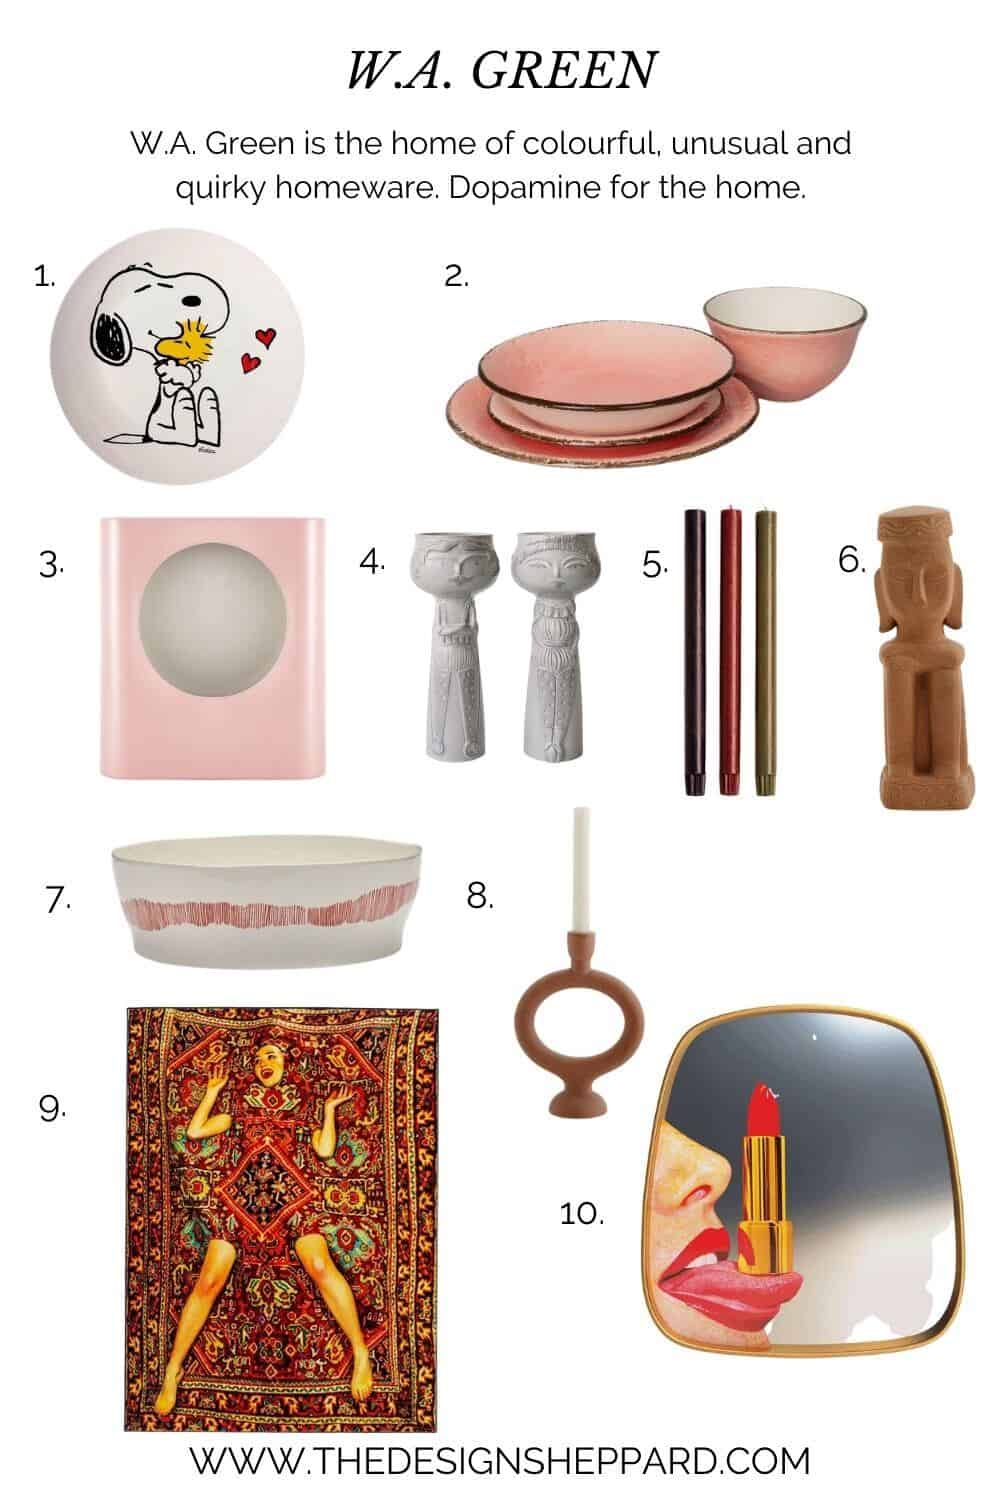 A selection of fun, quirky and unusal homeswares from W.A. Green